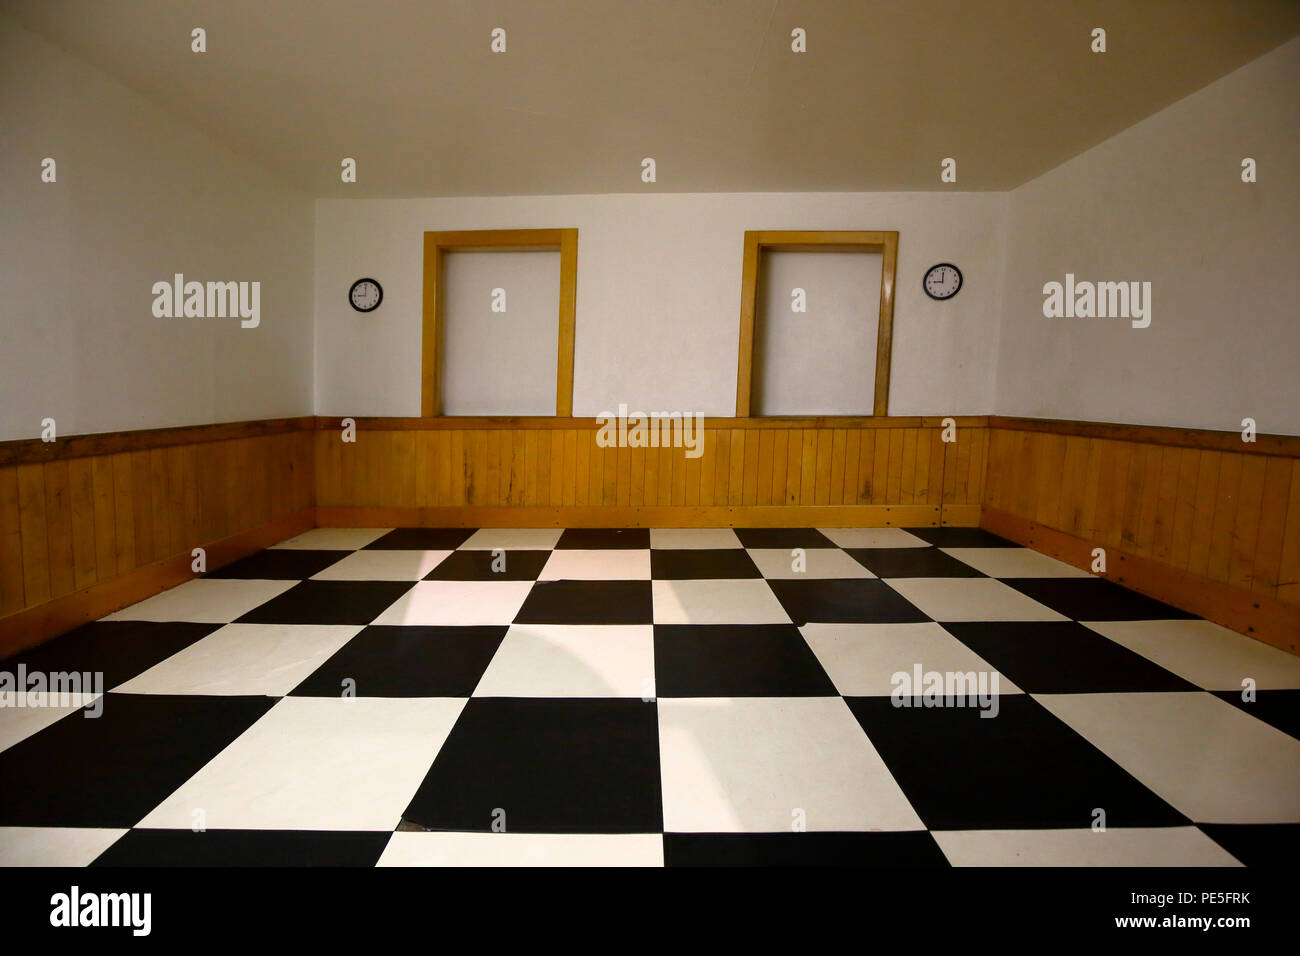 Ames Room optical illusion exhibit at the New York Hall of Science Stock Photo